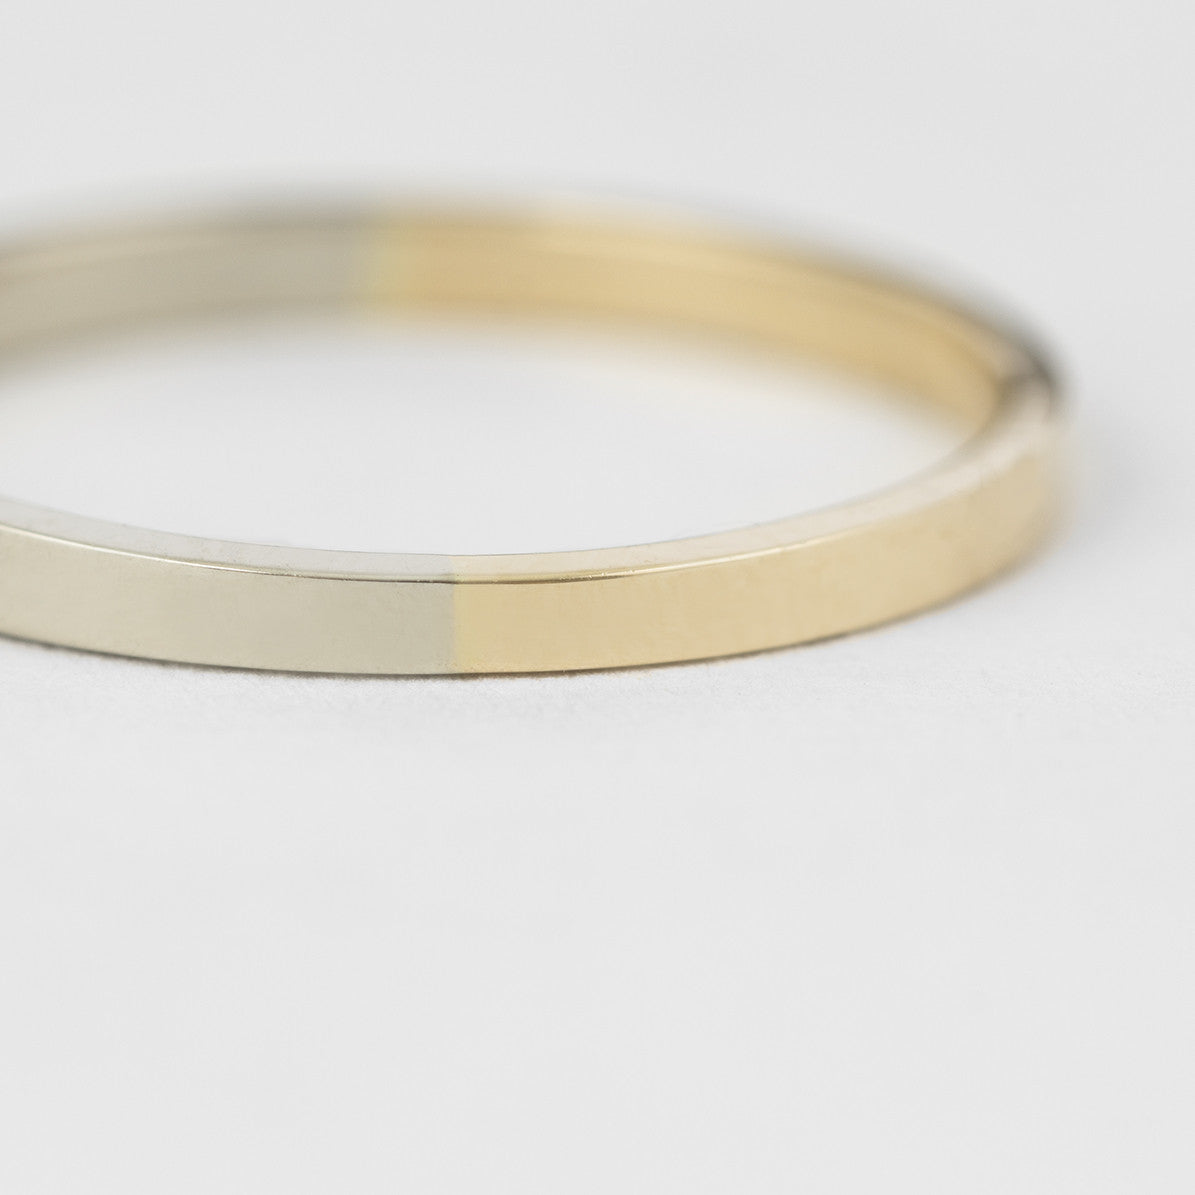 2mm Yellow and White Gold Band